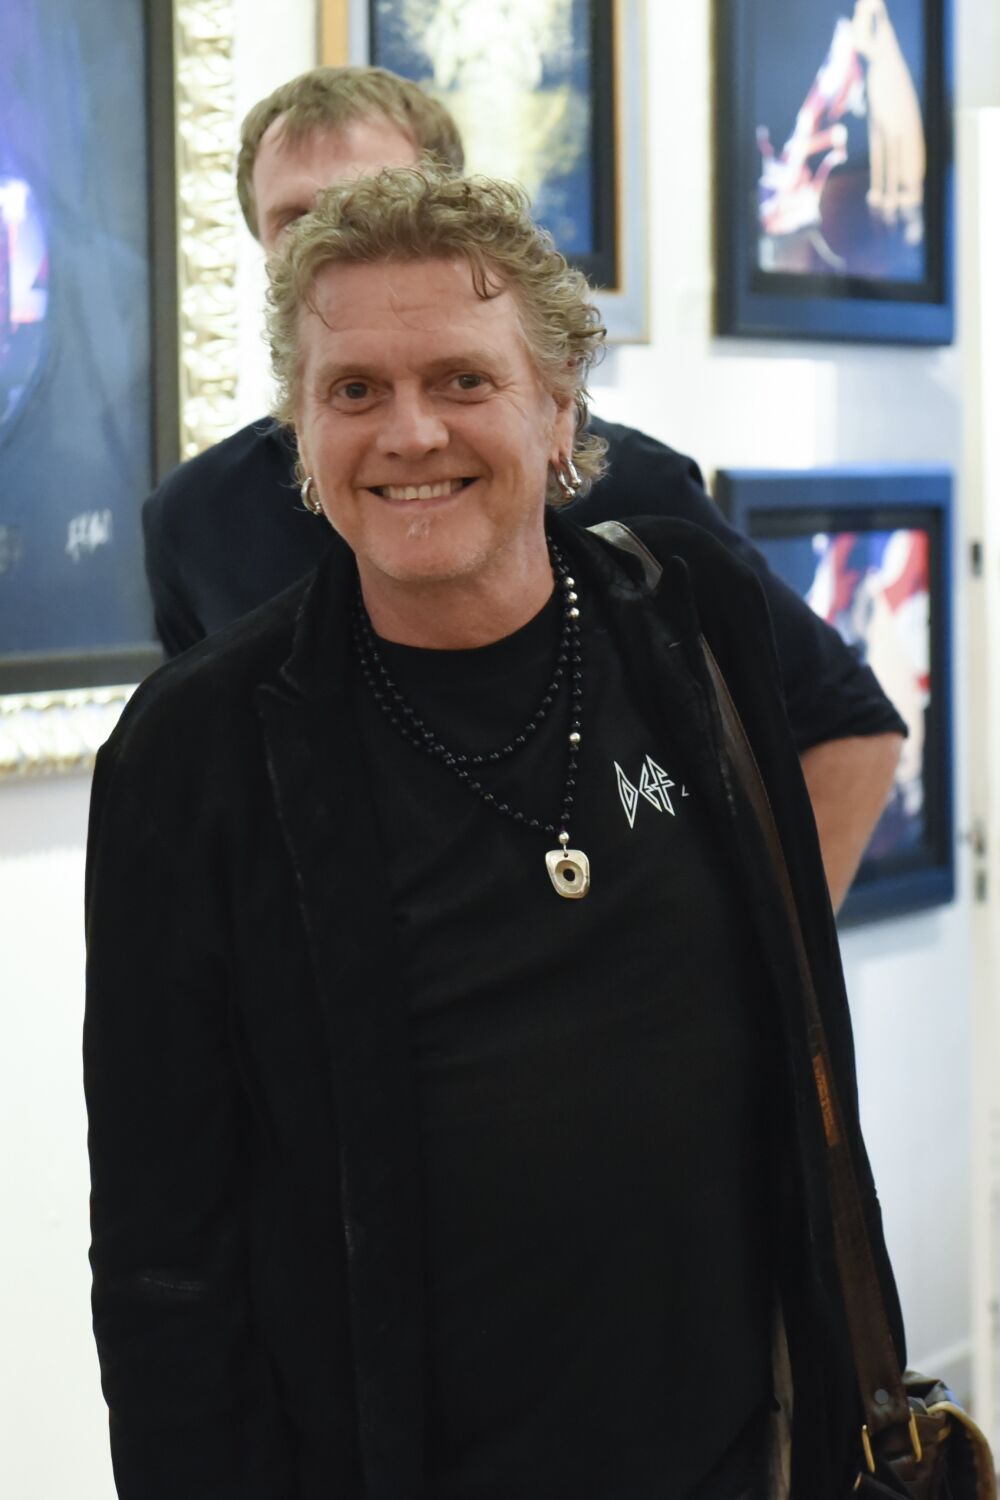 Def Leppard's Rick Allen wants to move on from 'confusion and shock' of Florida attack